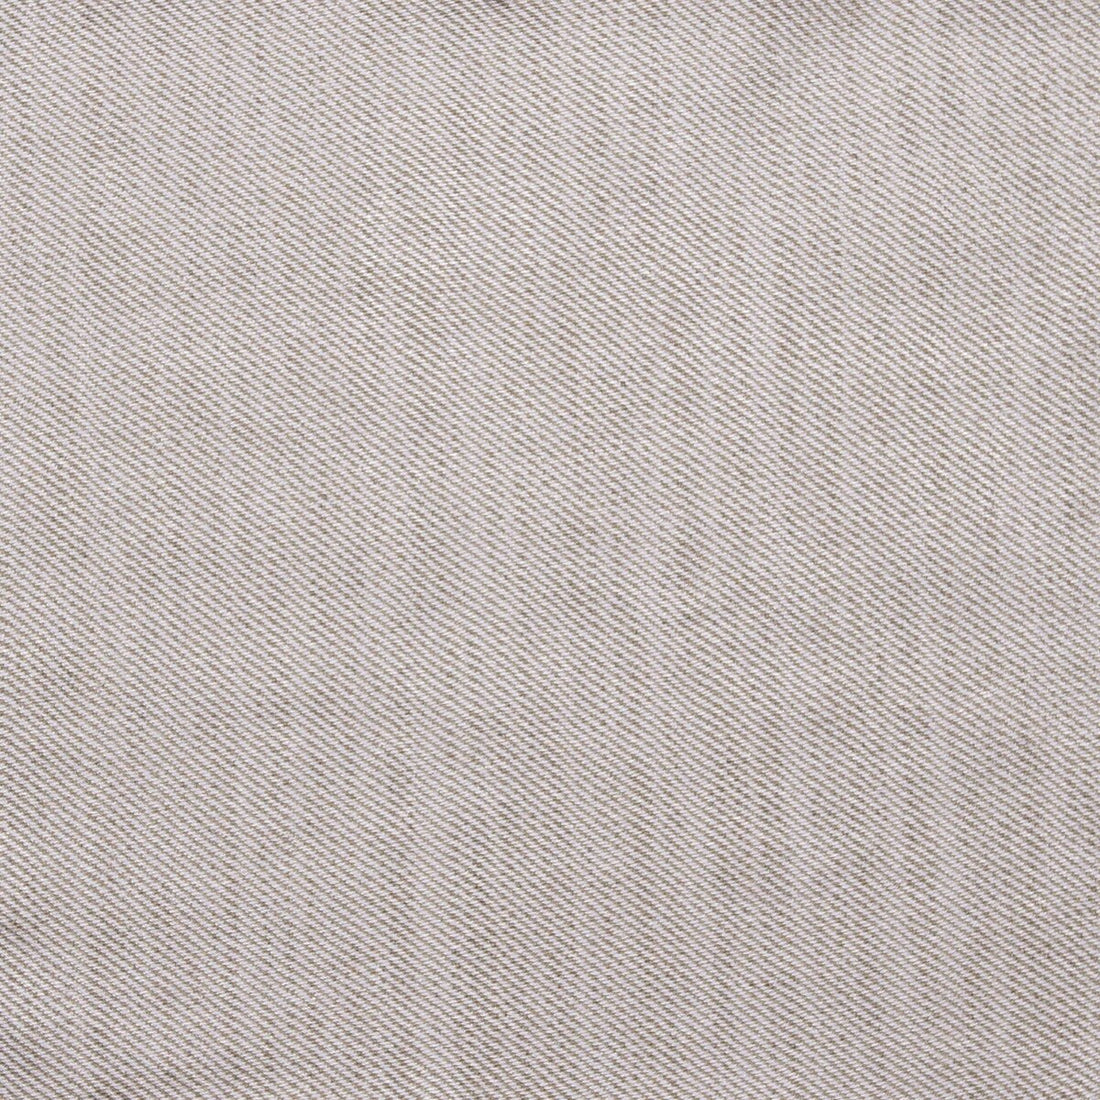 Victoria fabric in blanco/beige color - pattern GDT5388.2.0 - by Gaston y Daniela in the Gaston Africalia collection